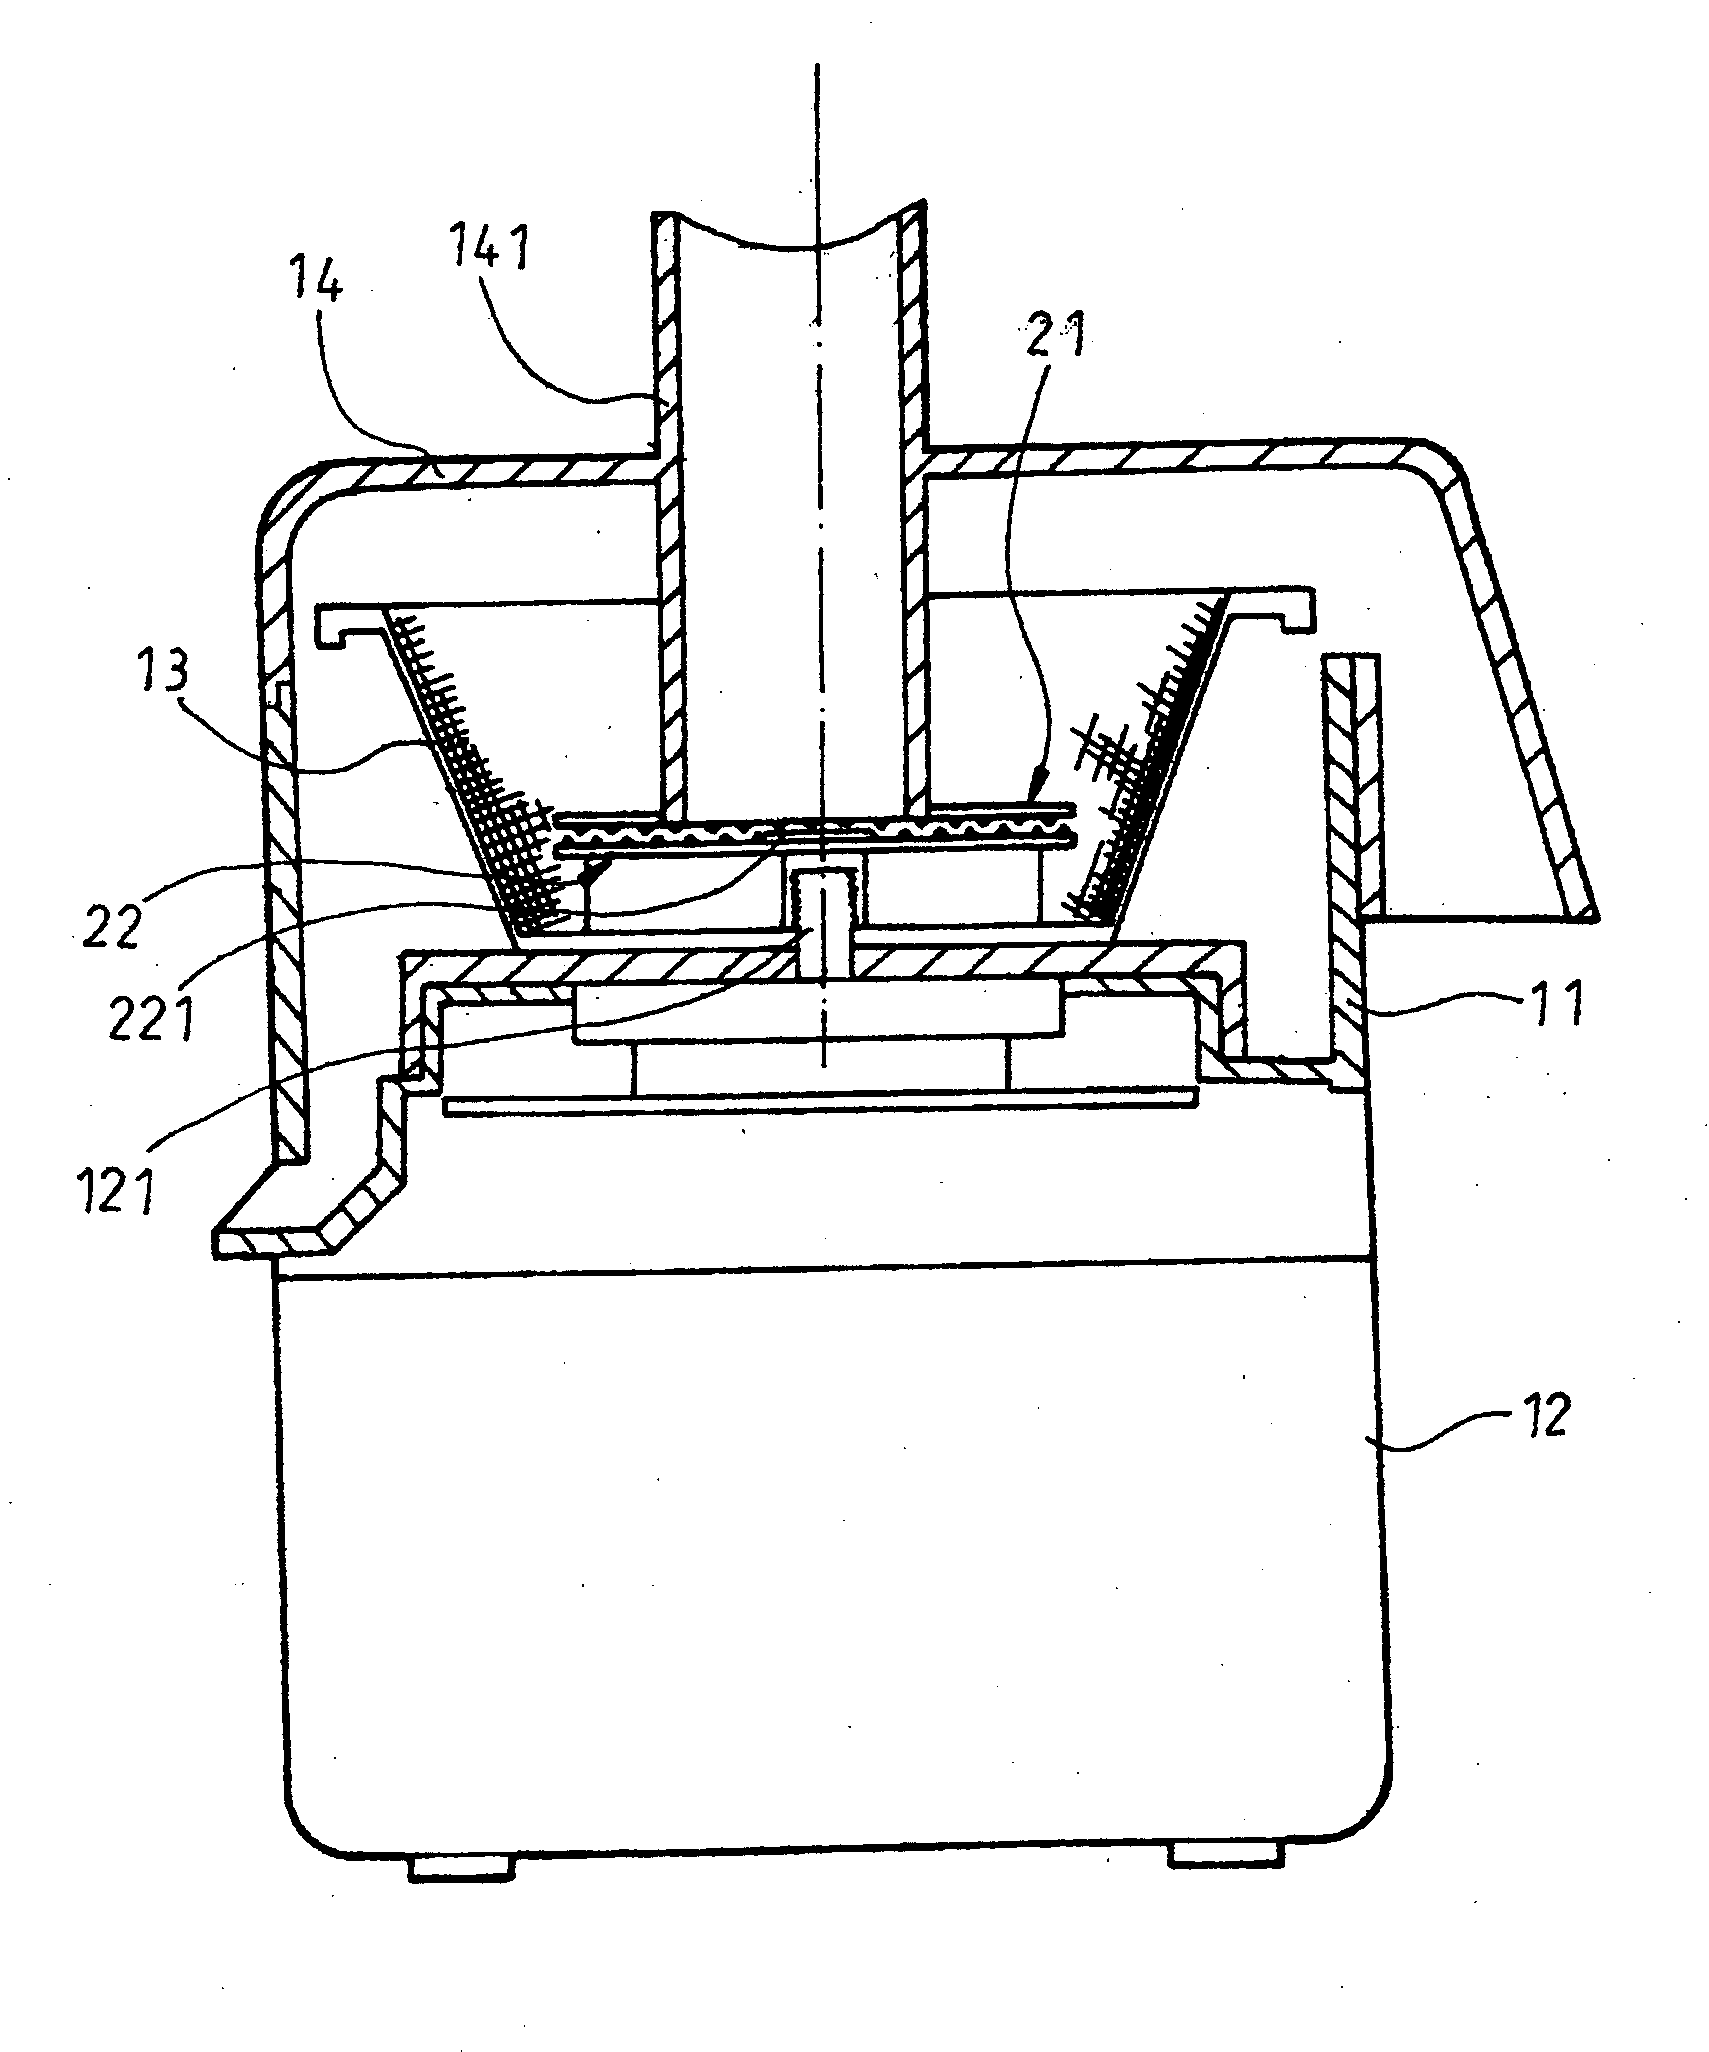 Food processor with combined grinding and juice extracting functions